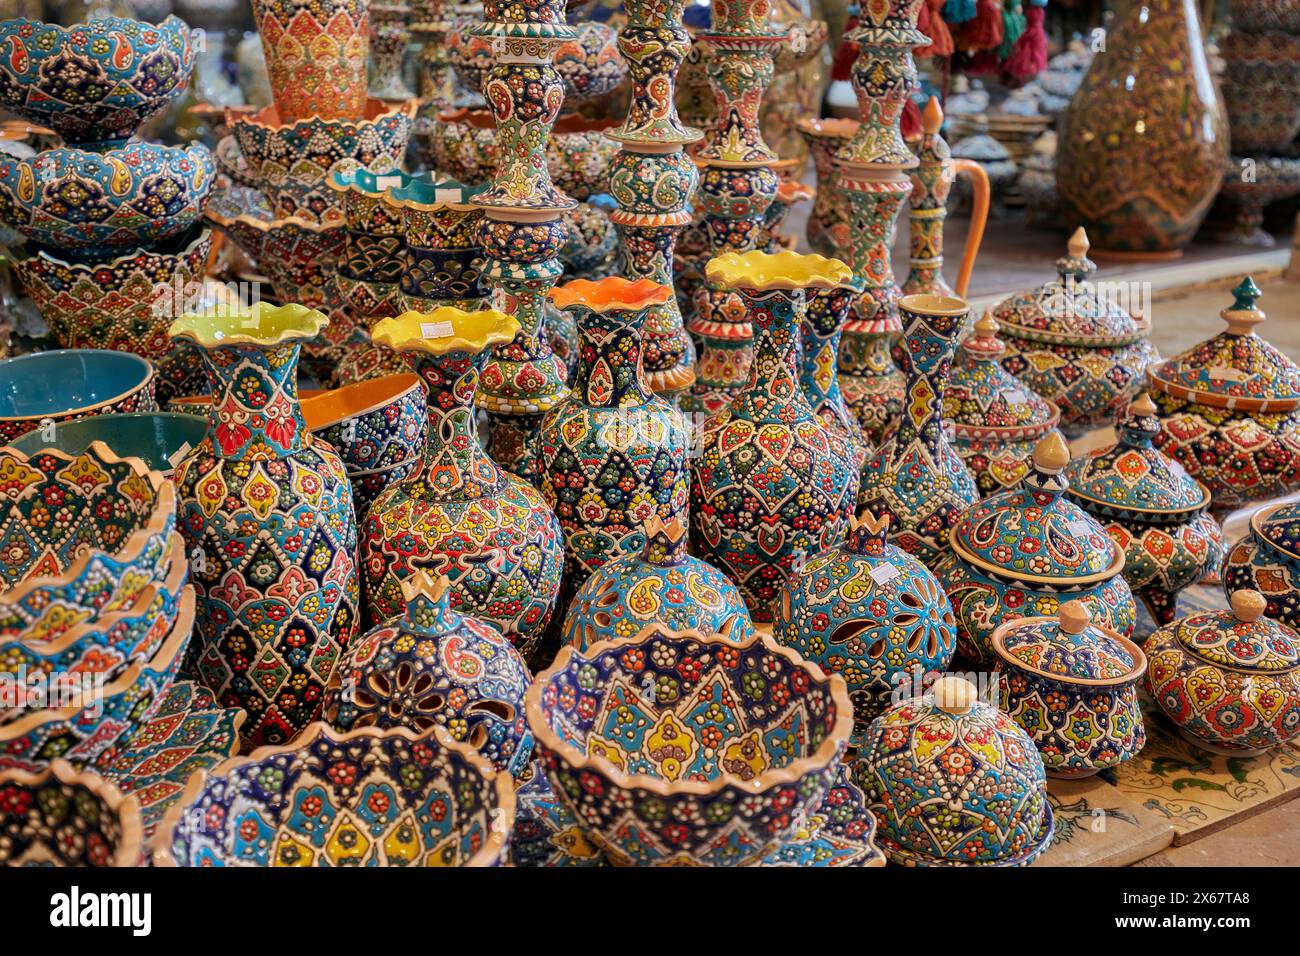 Colorful selection of traditional handmade pottery and ceramics displayed in a gift shop in the Vakil Bazaar. Shiraz, Iran. Stock Photo